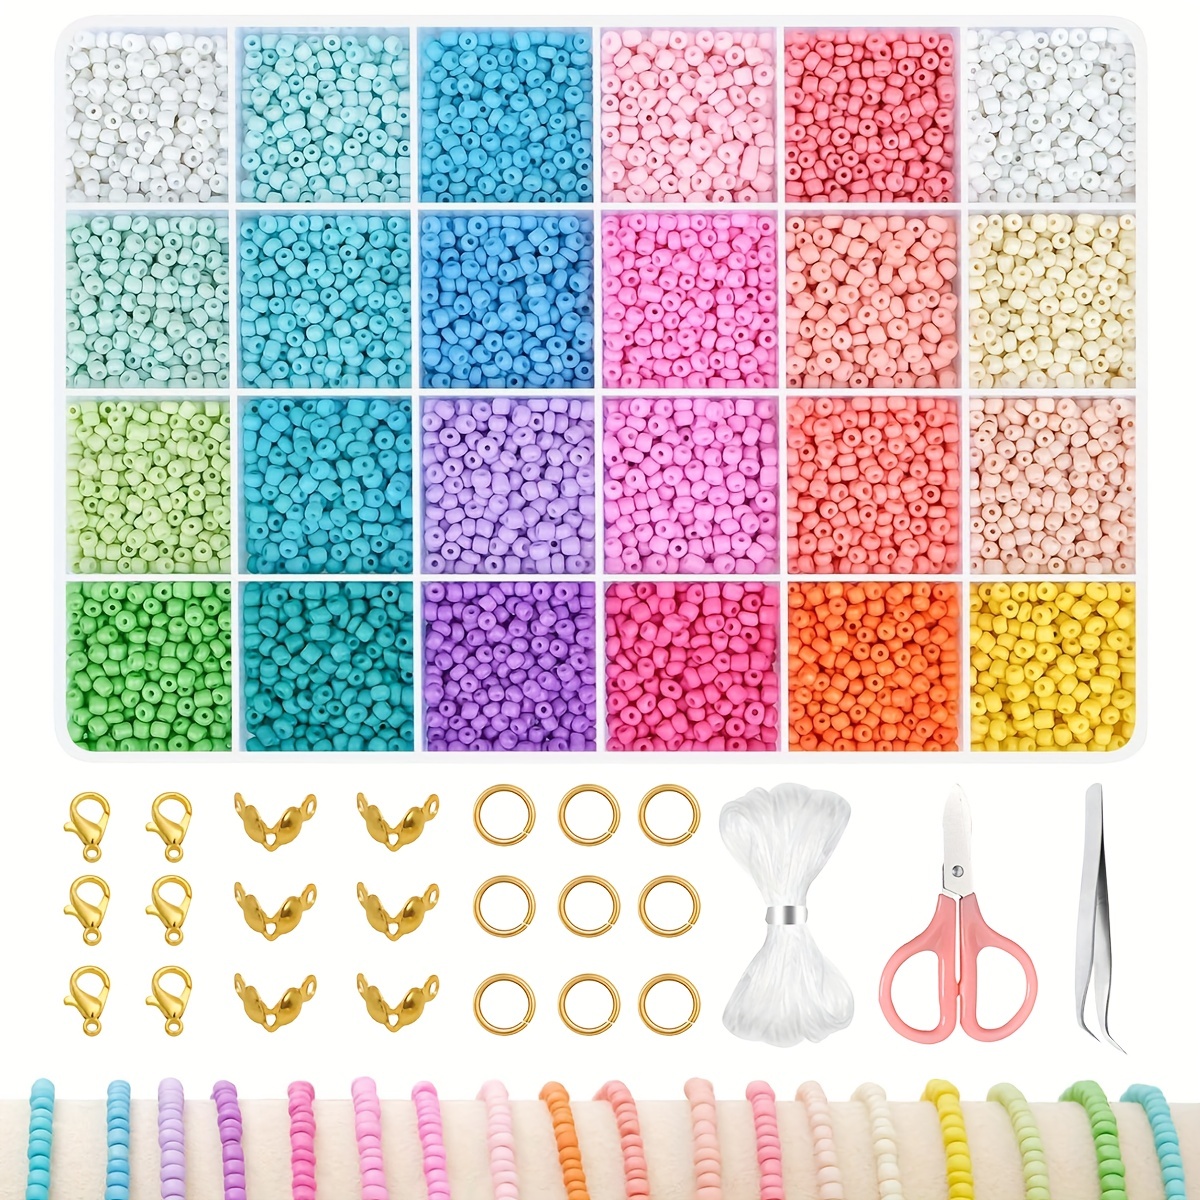 

7200pcs 3mm Glass Seed Beads Kit For Diy Jewelry Making - Perfect For Bracelets, Necklaces & Craft Gifts Beads For Jewelry Making Beads For Bracelets